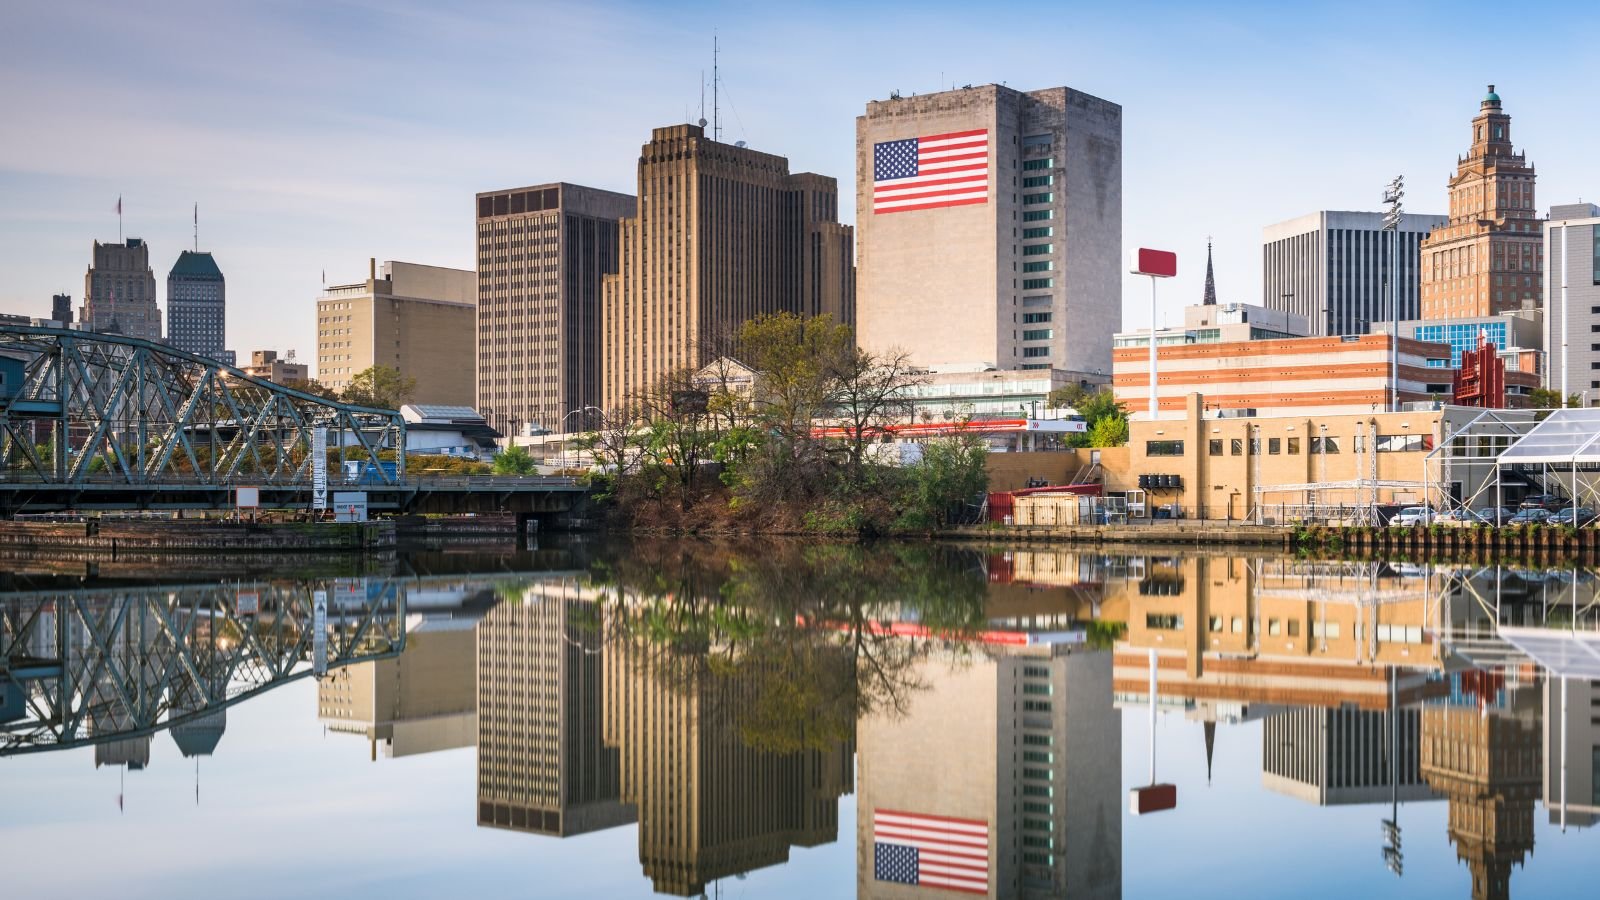 19 Happiest States In America According To A Survey 